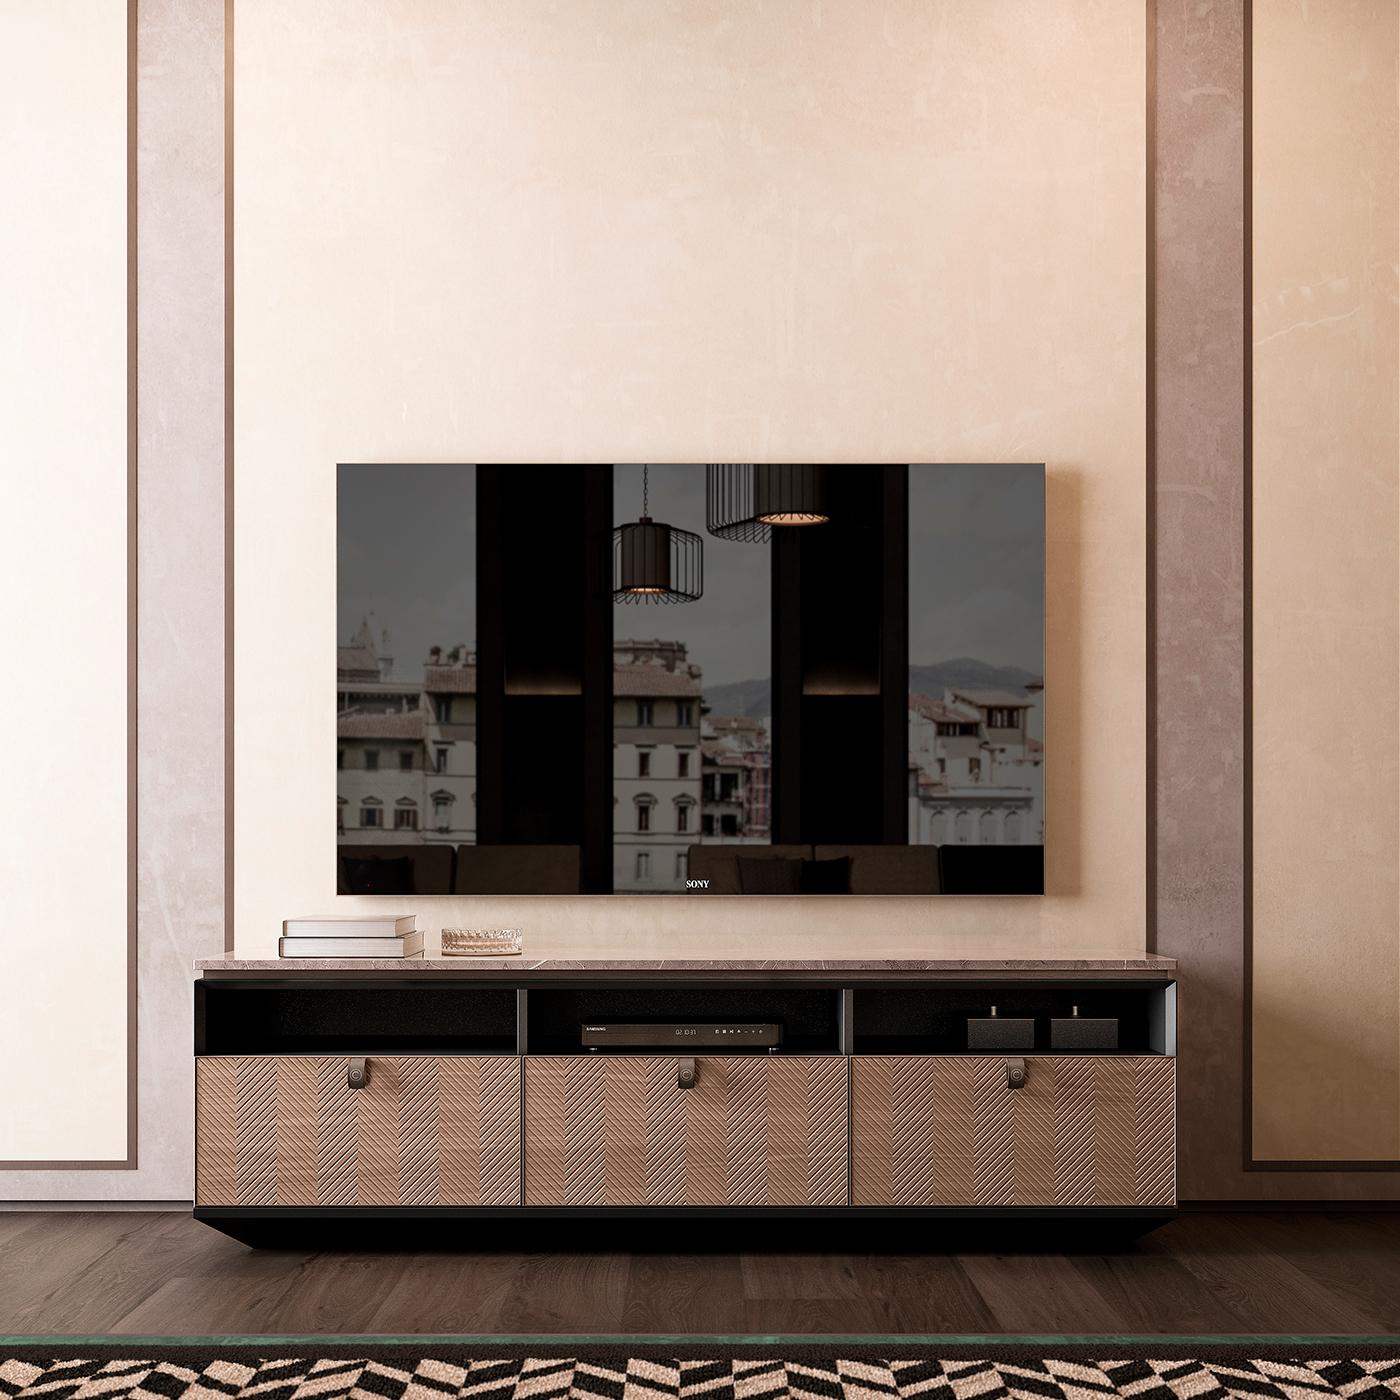 Timeless materials meet original contemporary design in this marble TV stand. Featuring a chic marble surface, the cabinet comes with three slots for DVD players, a gaming system and modem as well as three spacious drawers, accented with a unique